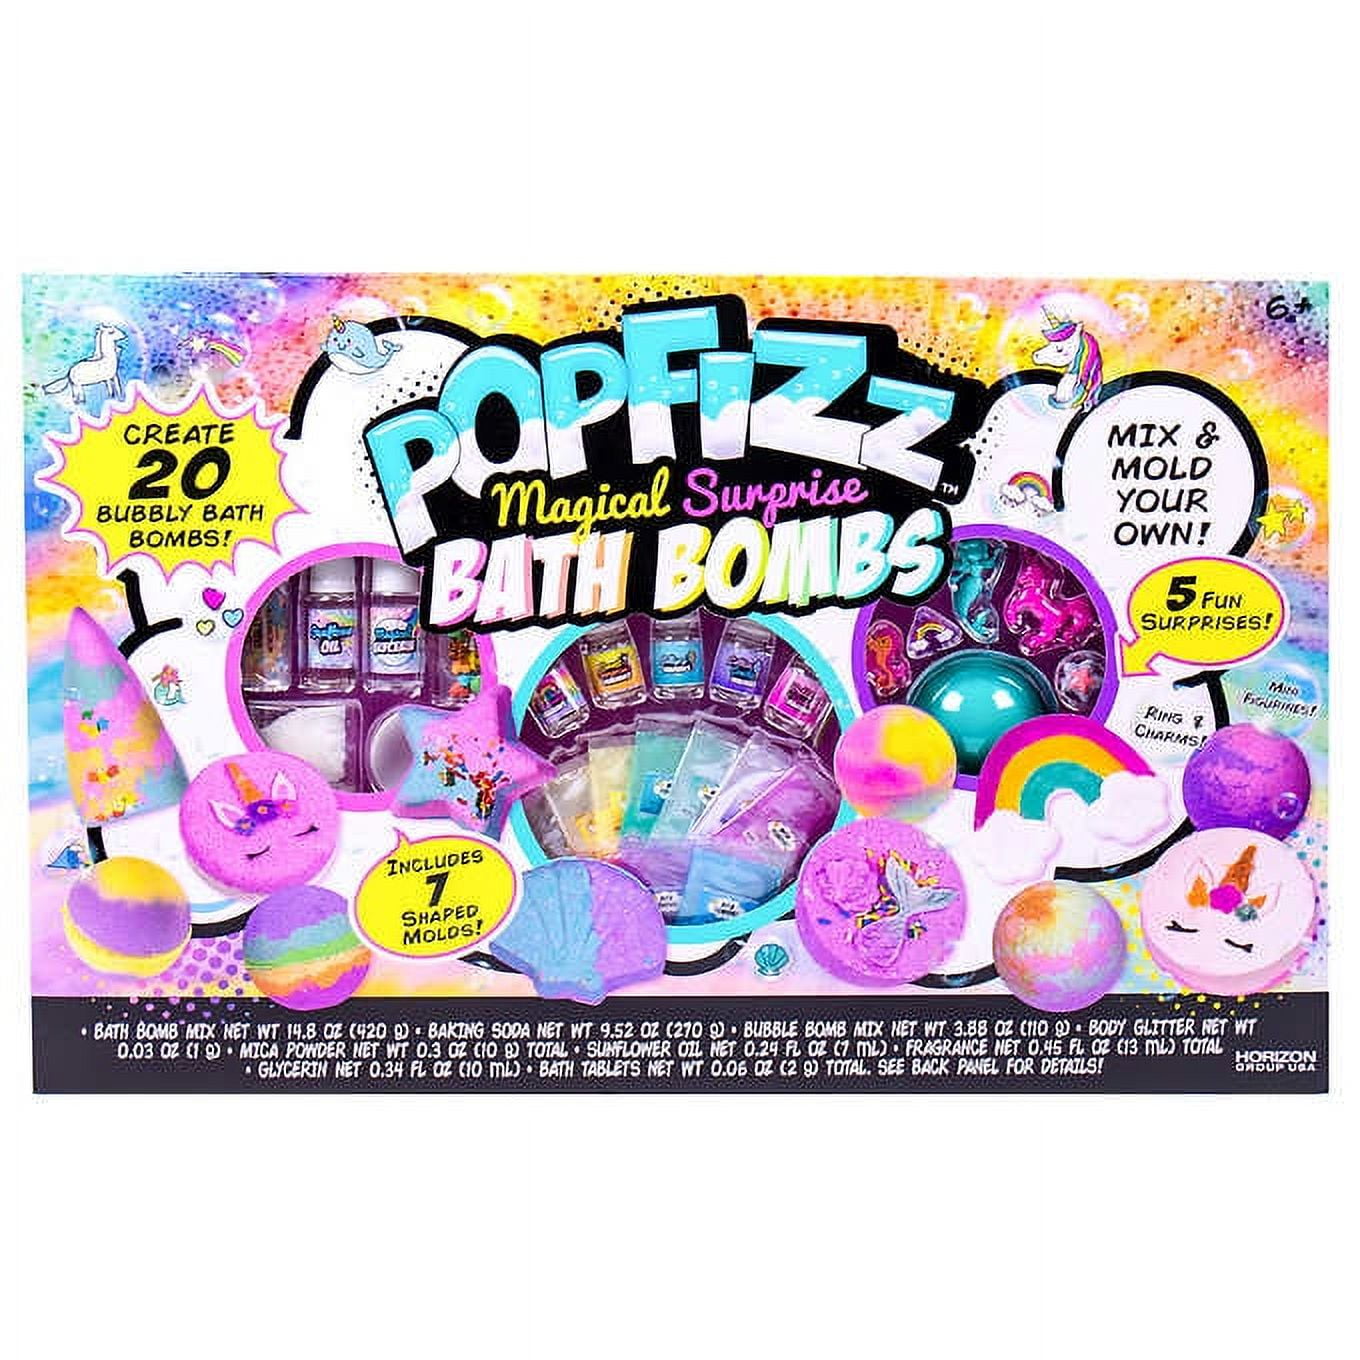 Pop Fizz Scented Surprise DIY Bath Bombs Kit by Horizon Group USA, Create 20 Sweet Treats Scented Colorful Bath Bombs with Essential Oils